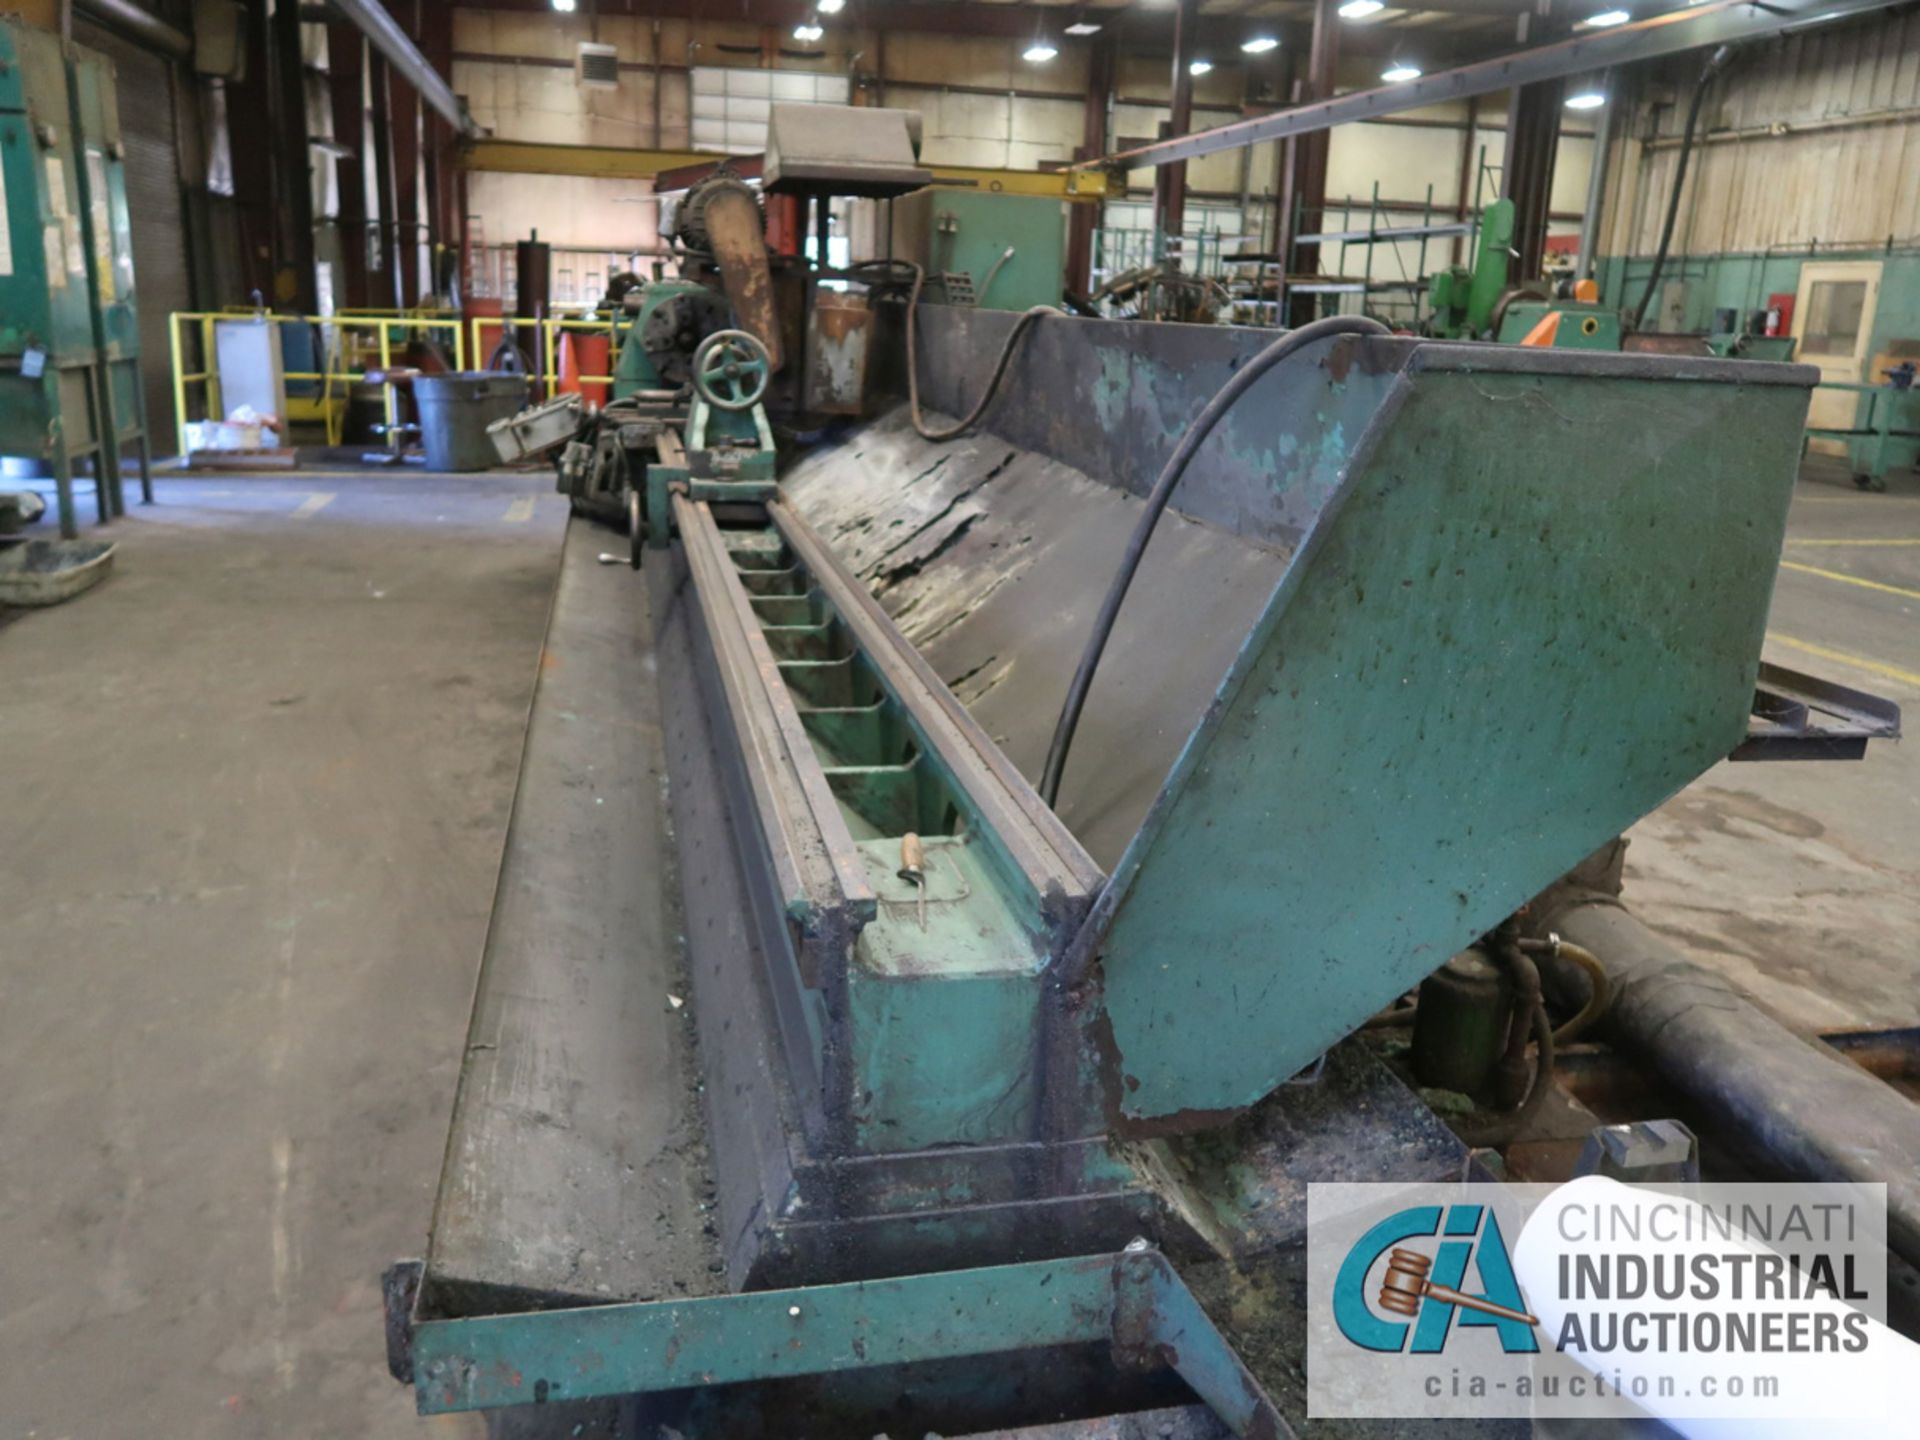 24" X 16' SOUTH BEND ROLL GRINDER; S/N 118AM, 500 RPM, 22" 4-JAW CHUCK, TAILSTOCK, GRINDER - Image 9 of 11